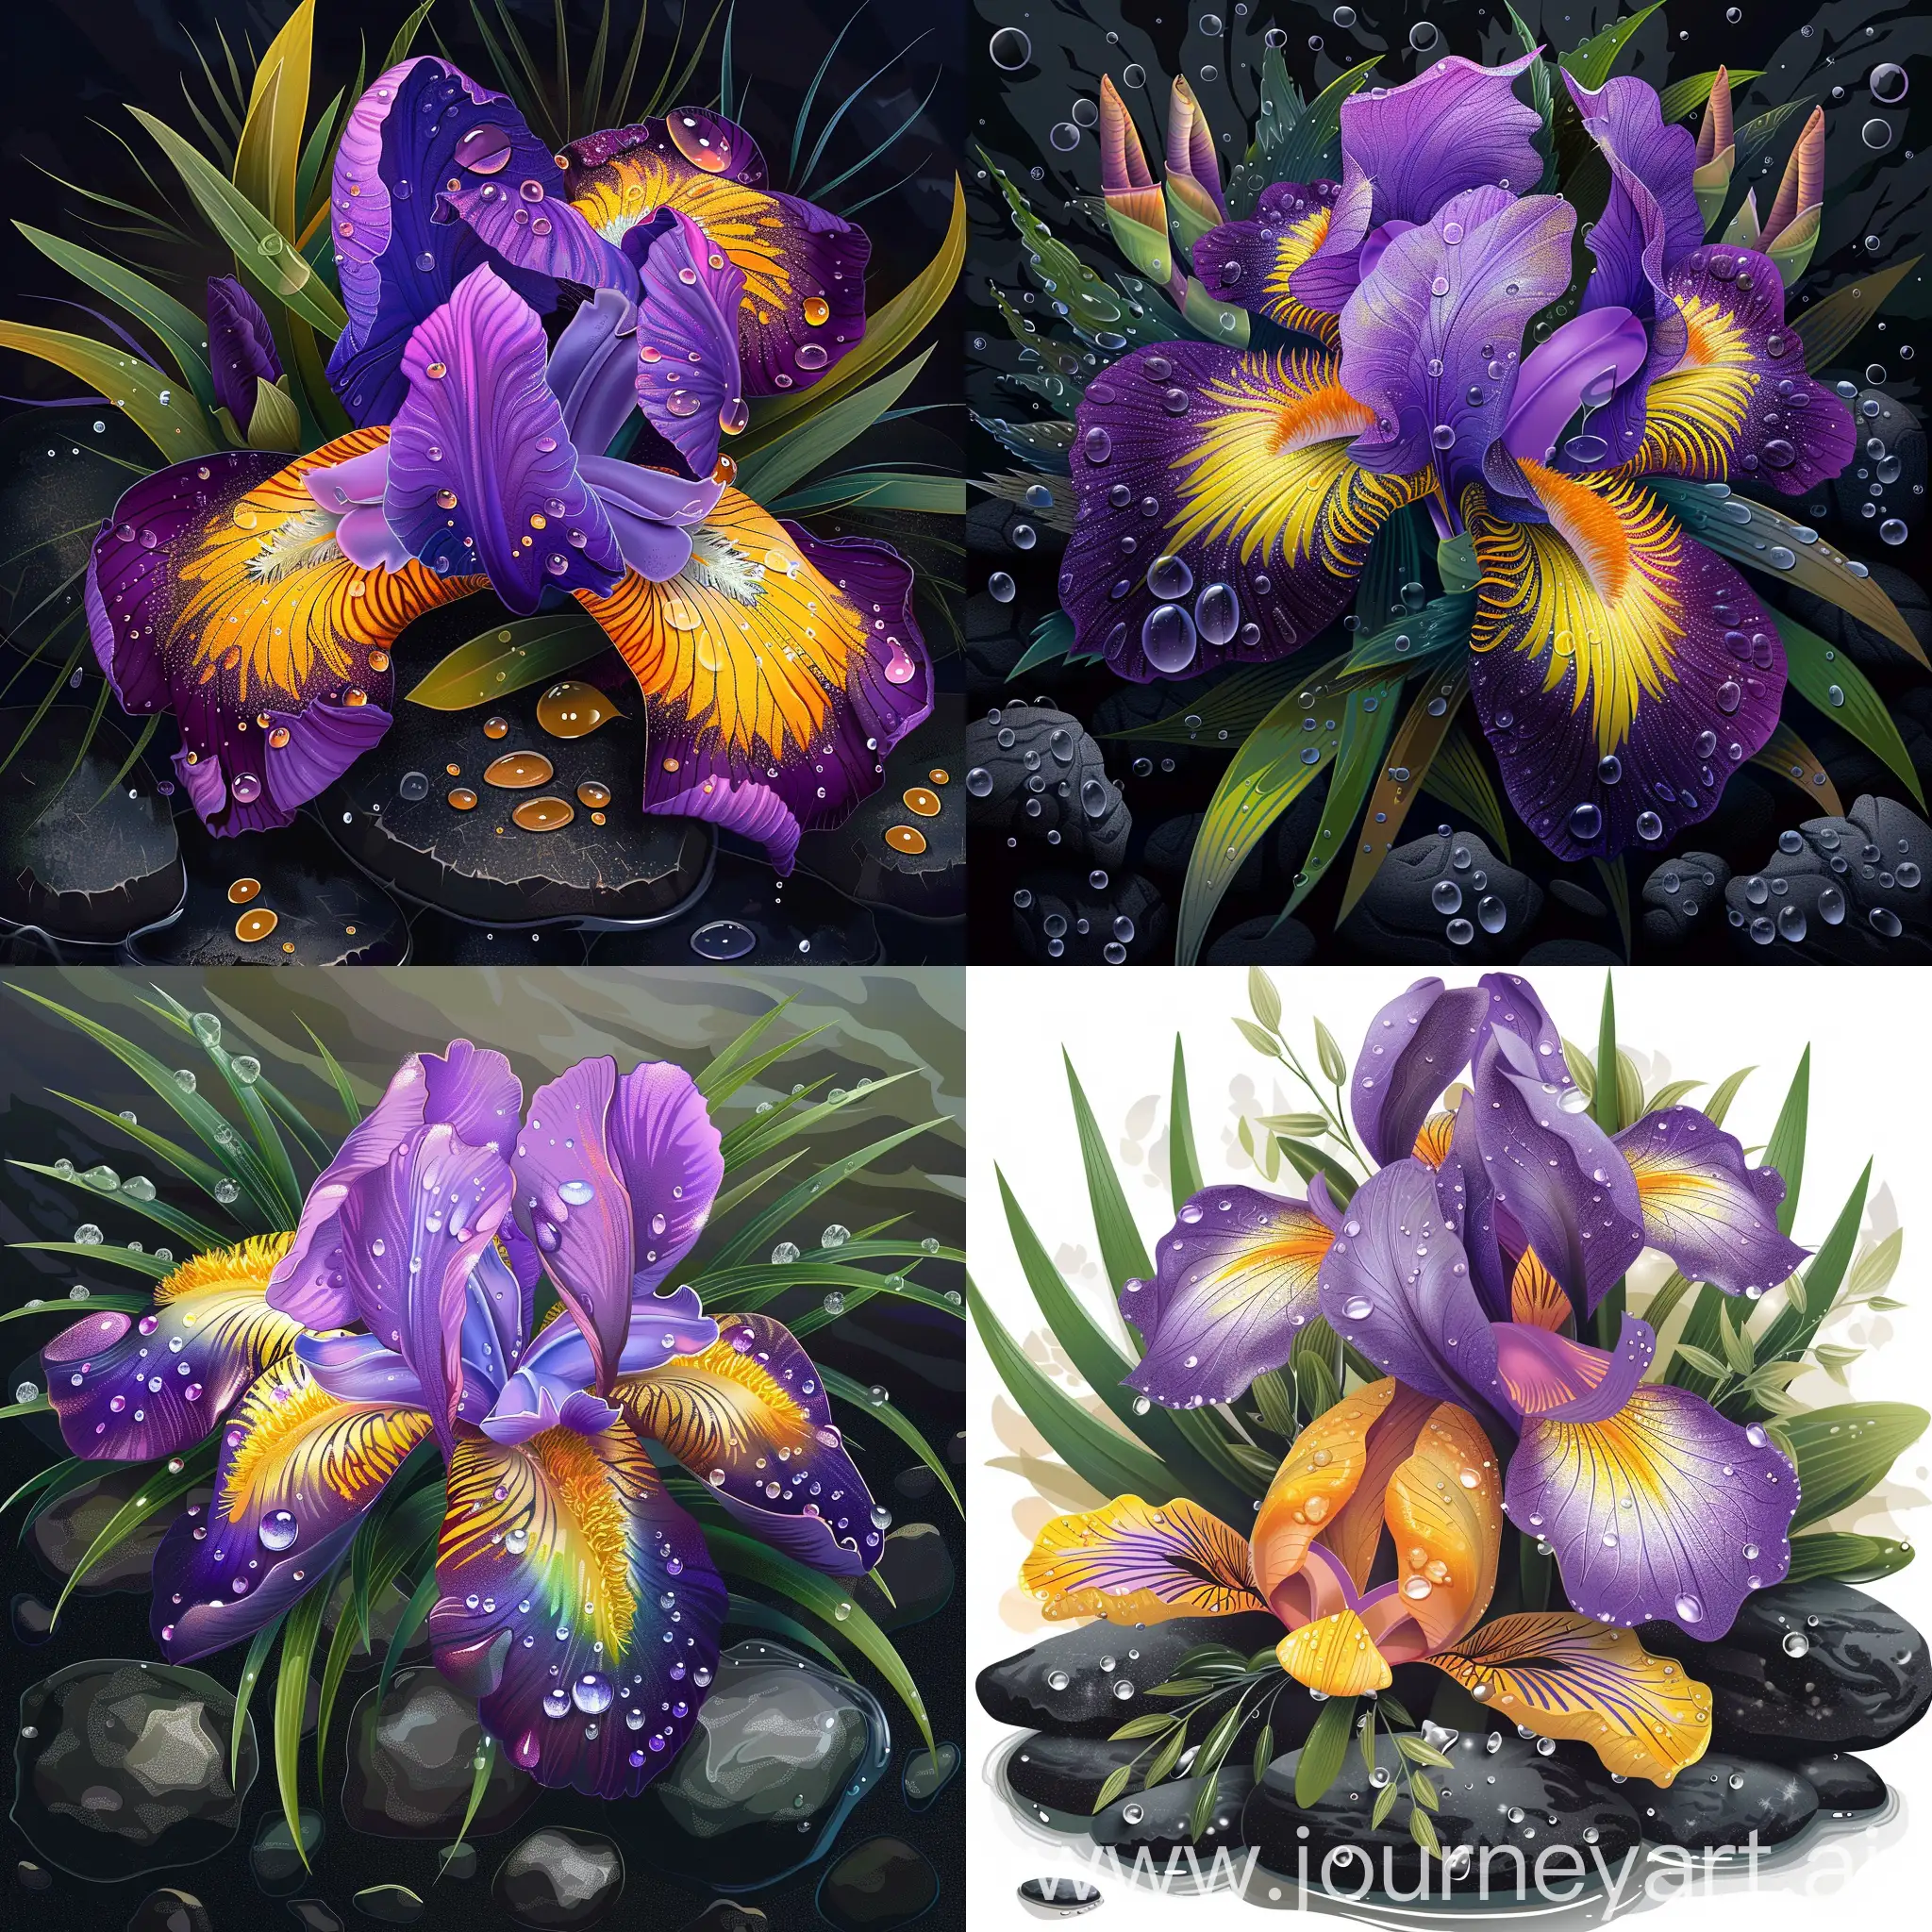 large Iris flowers, bright purple and bright yellow with greenery, sitting on black rocks, water droplets, centered, in vector style,